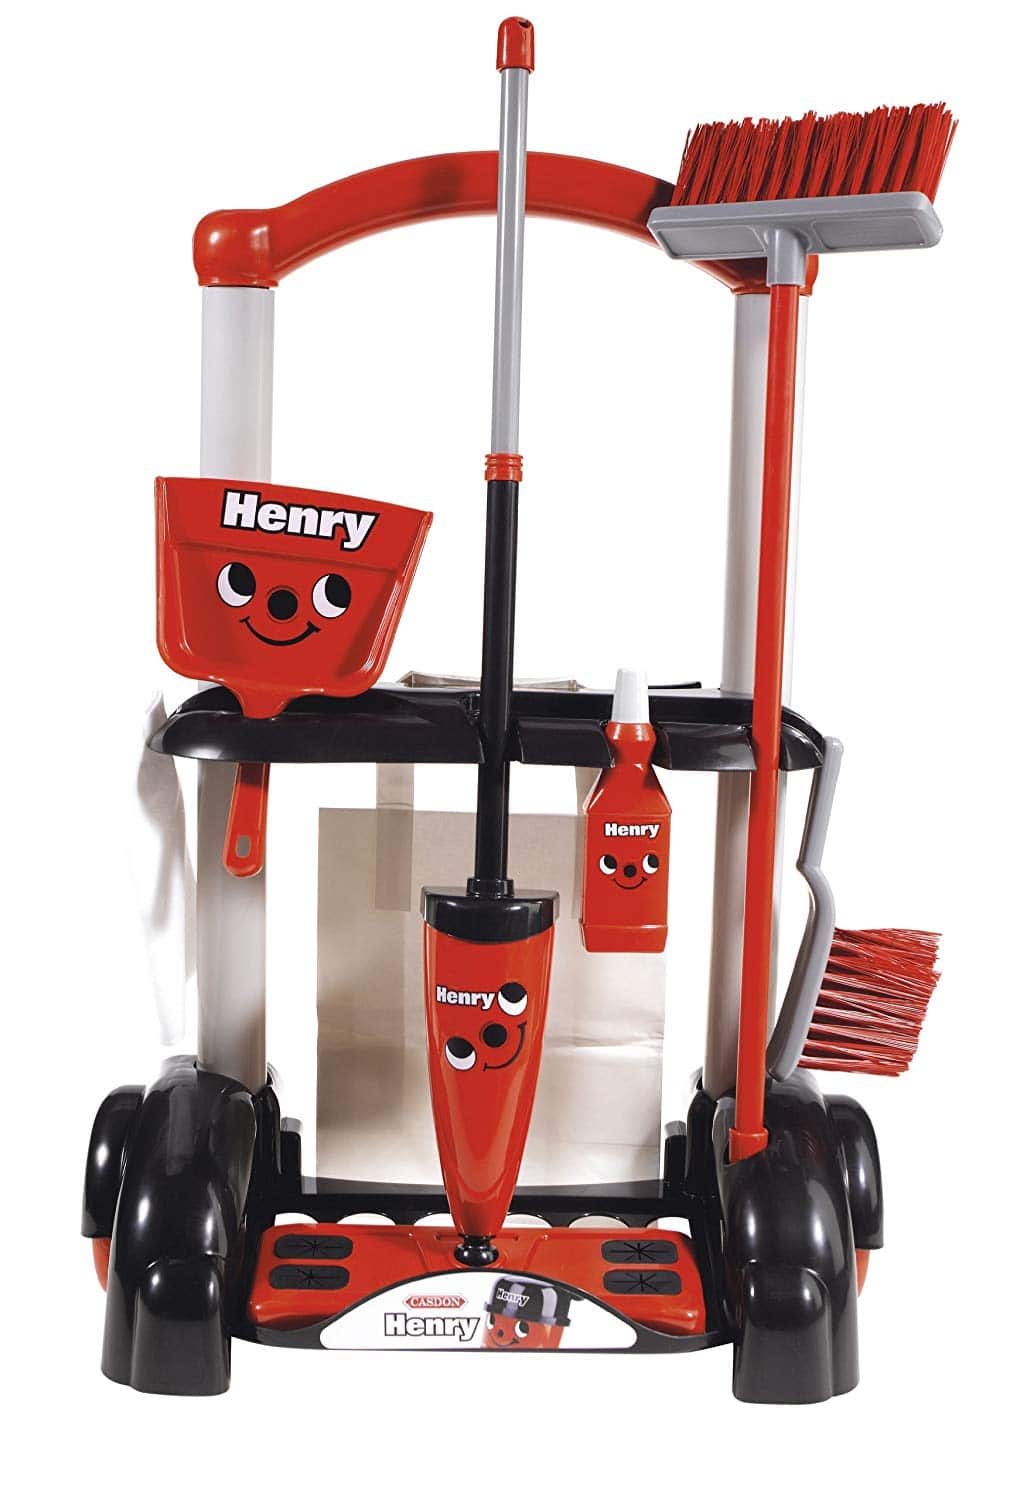 henry toy cleaning set